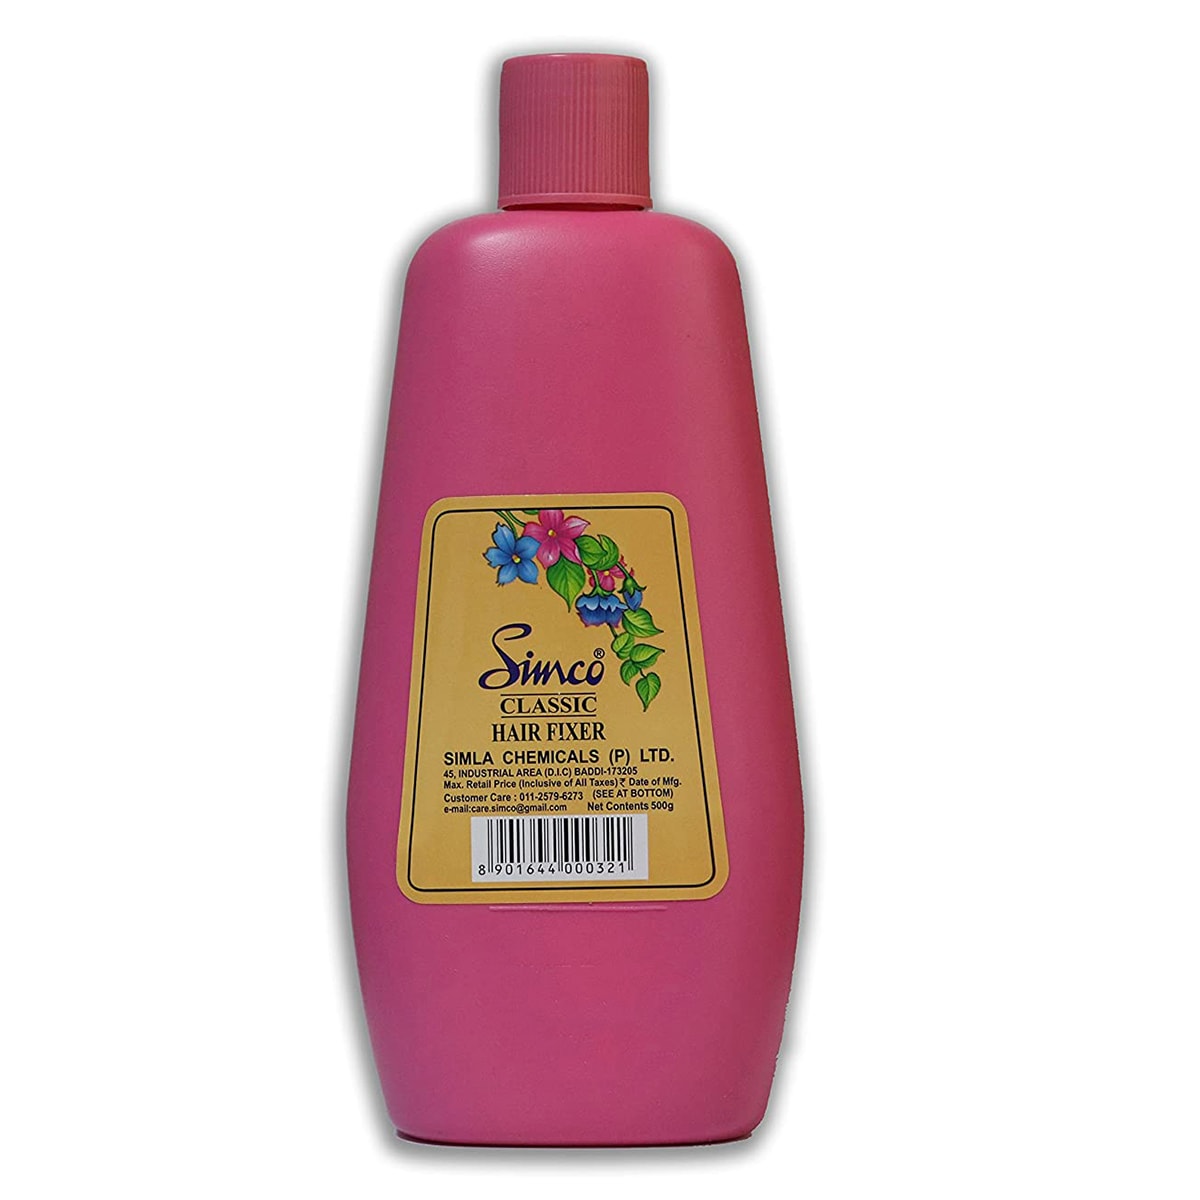 Buy Simco Classic Hair Fixer (Pink Bottle) - 300 gm